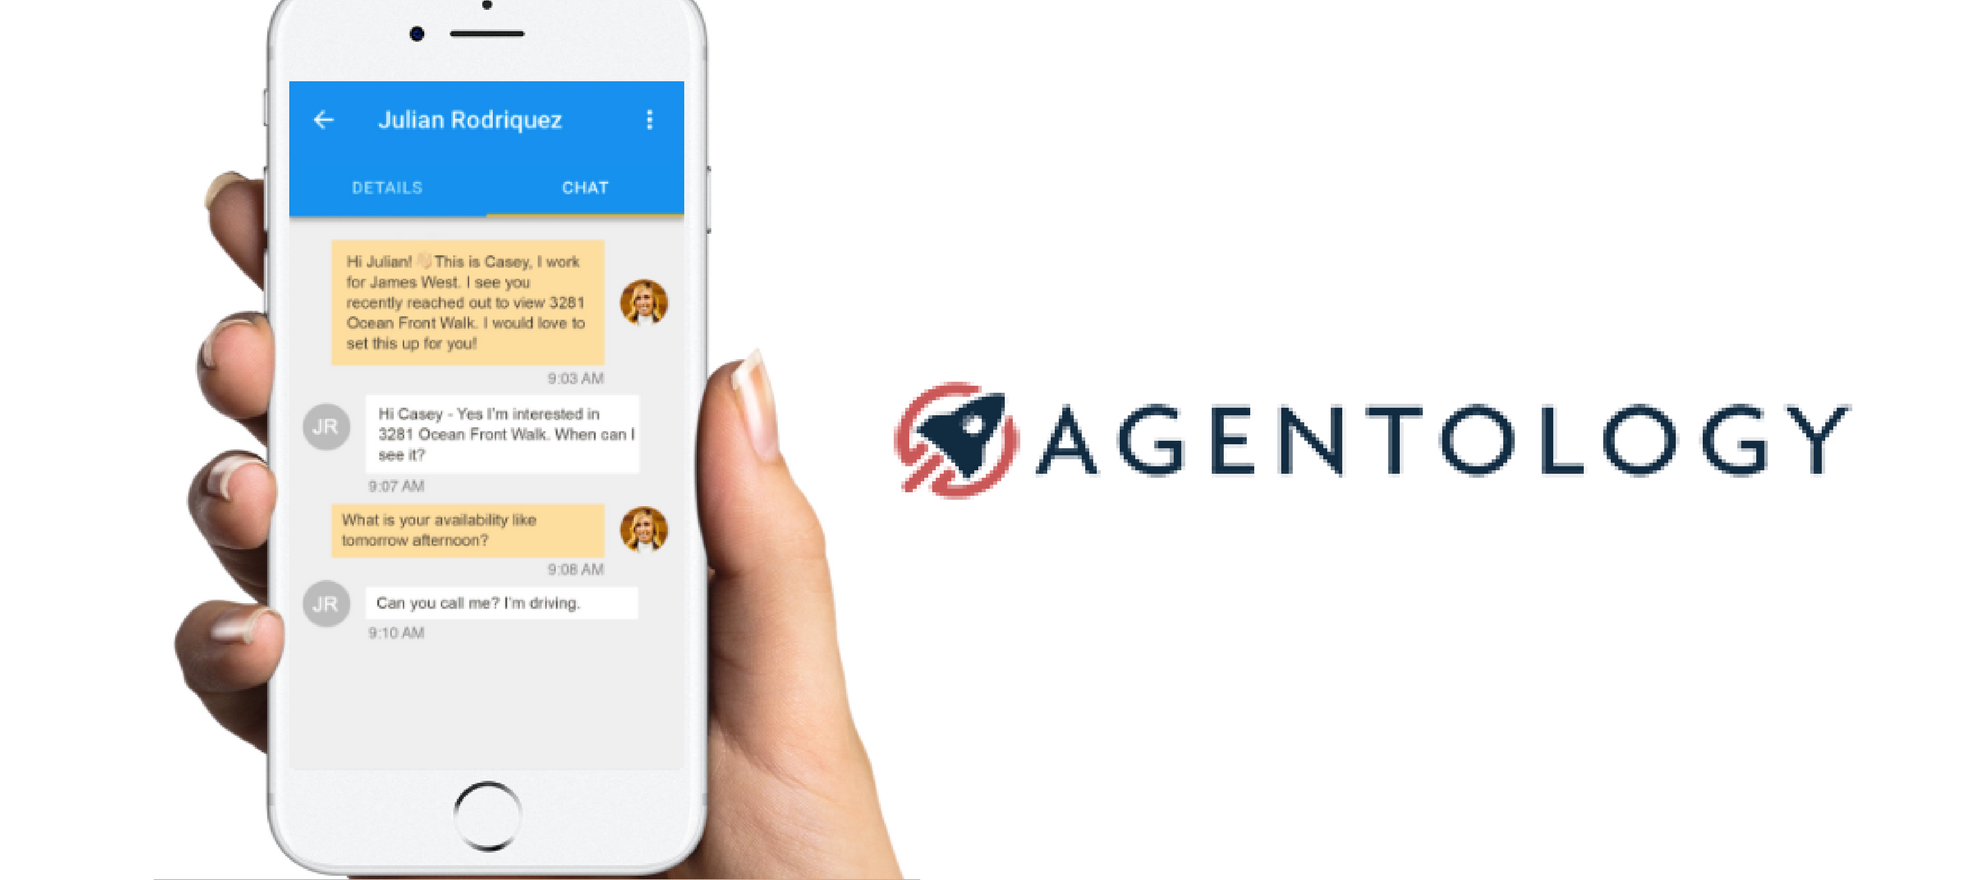 , Developing rapid response services for real estate agents, Agentology bags $12 million, #Bizwhiznetwork.com Innovation ΛＩ